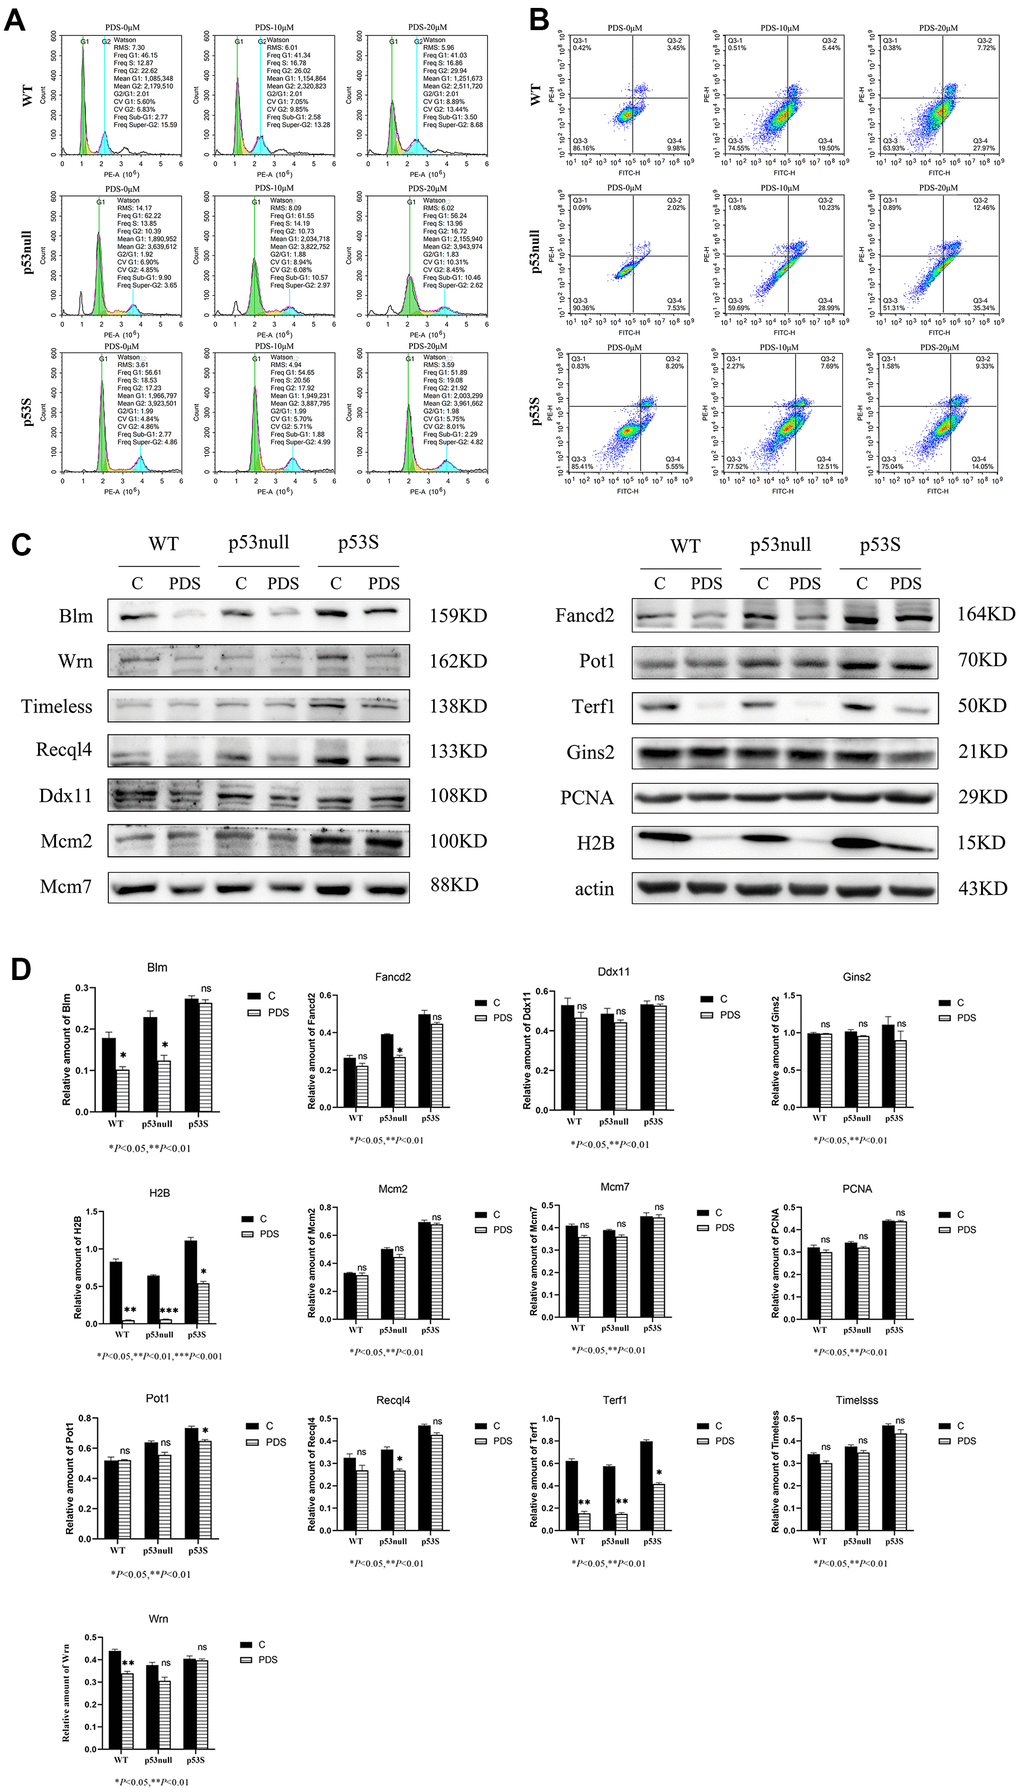 The p53S endowed the cellular resistance to G4 stabilizer treatment. (A) The cell cycle analysis revealed the G2 arrest induced by 20 μM PDS treatment, the p53null cells were most sensitive while the p53S cells were not sensitive. (B) The Annexin V staining displayed the cellular apoptosis induced by 20 μM PDS treatment. The p53null cells were most sensitive to PDS treatment, while p53S endowed the cell’s resistance to PDS treatment. (C) The DNA helicase protein level decreased after 20 μM PDS treatment, while p53S still maintained high level of DNA helicase. (D) The quantification of protein expression level in (C).